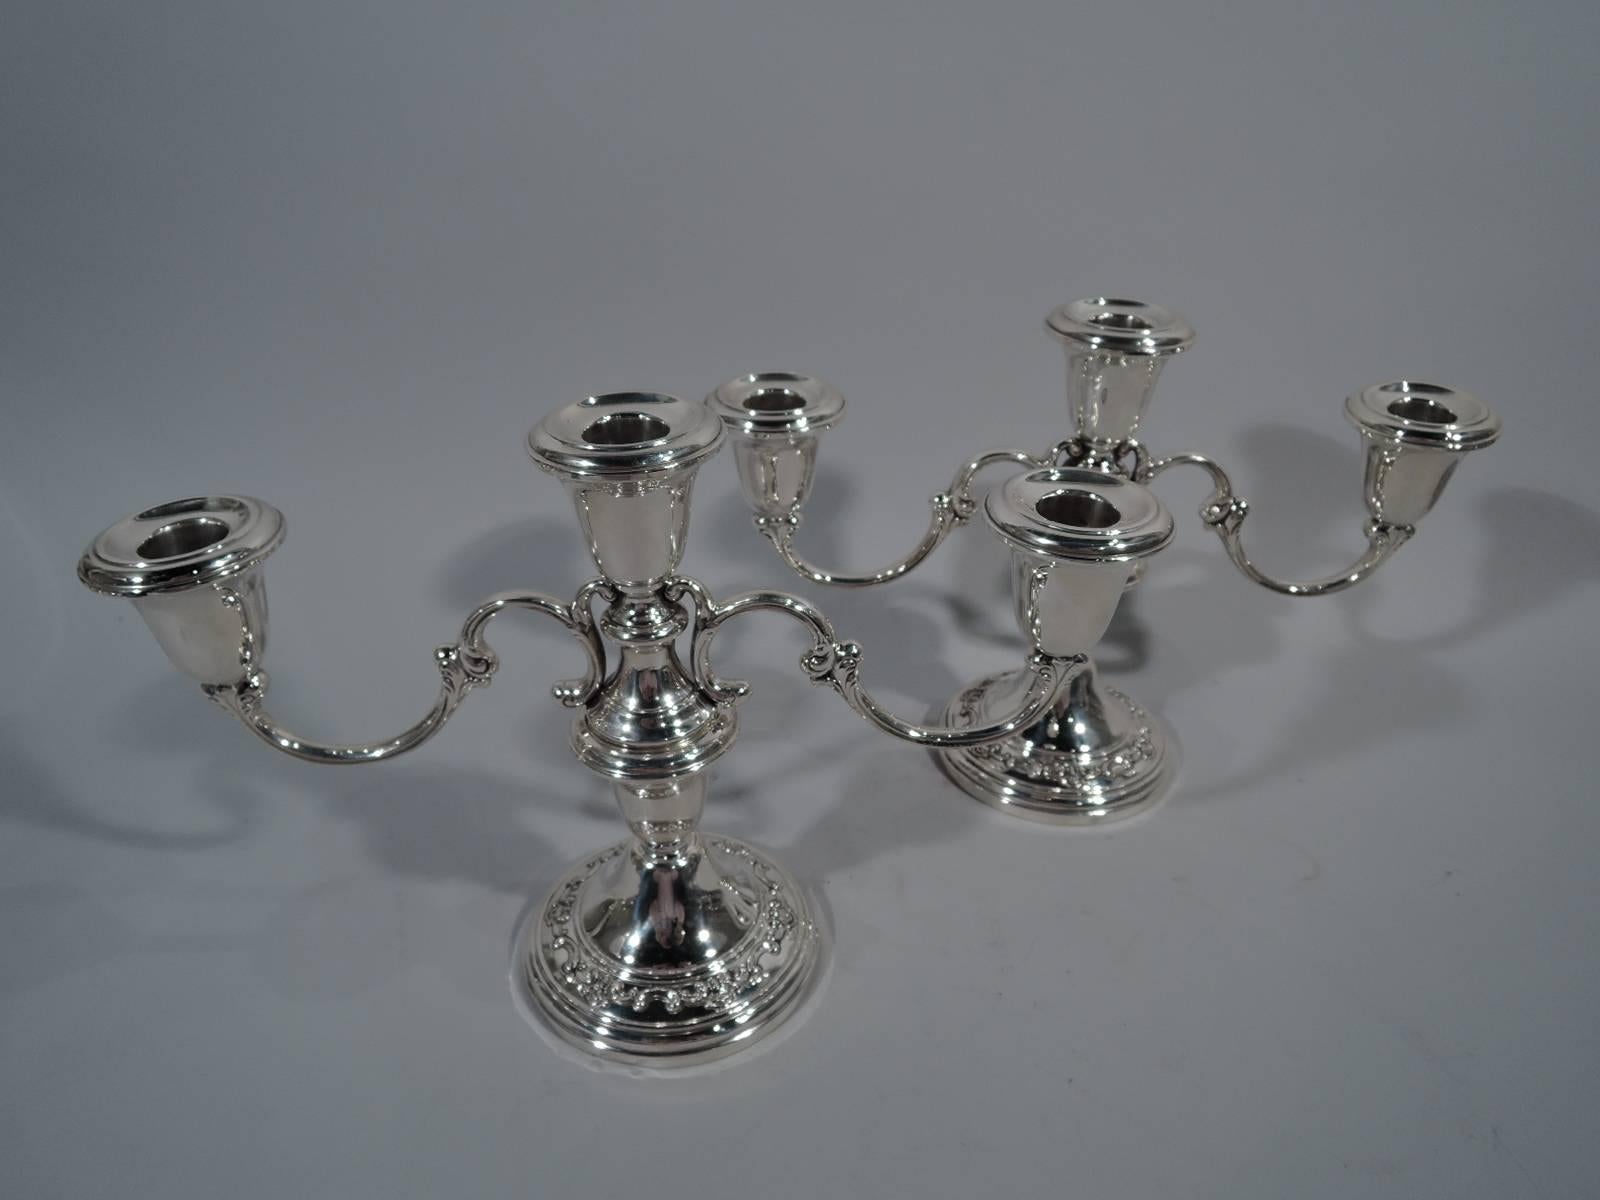 Pair of sterling silver low three-light candelabra in Strasbourg pattern. Made by Gorham in Providence. Each: Central socket with two double-scroll arms terminating in single socket. Base has applied c-scrolls and scallop shells. Converts to